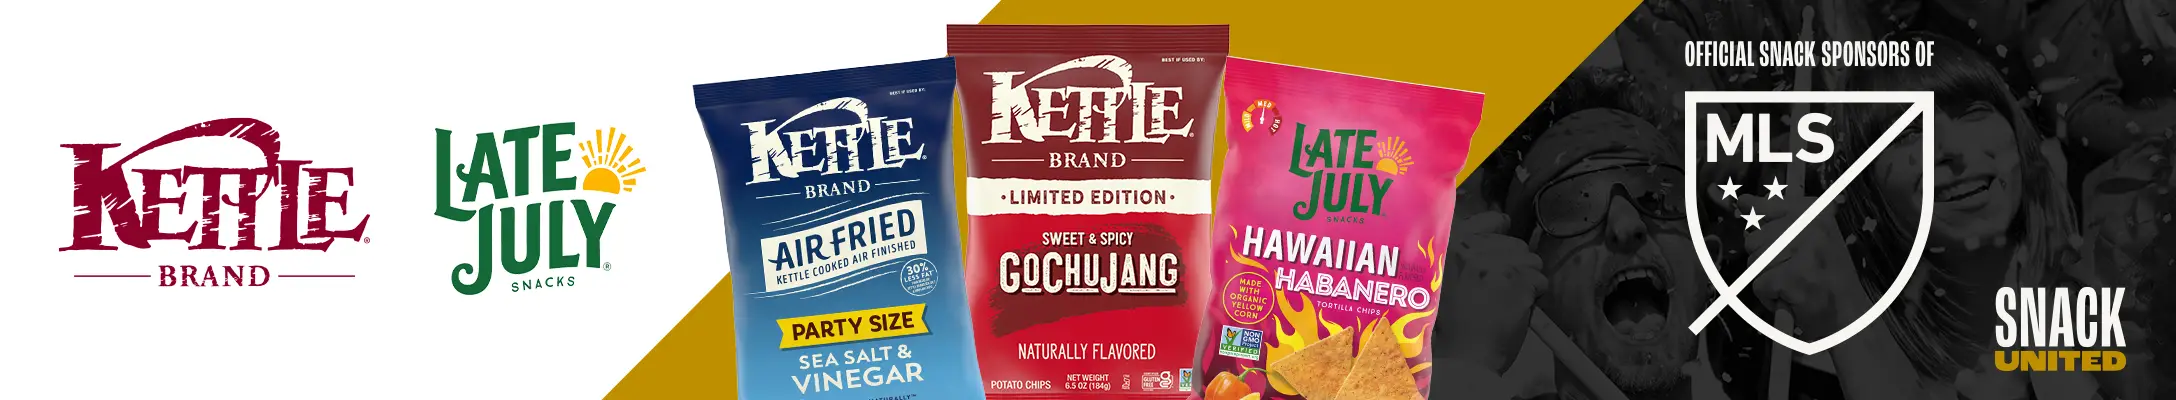 Kettle Brand and Late July Snacks logo next to product variety. Official snack sponsor of MLS and snack united logos.